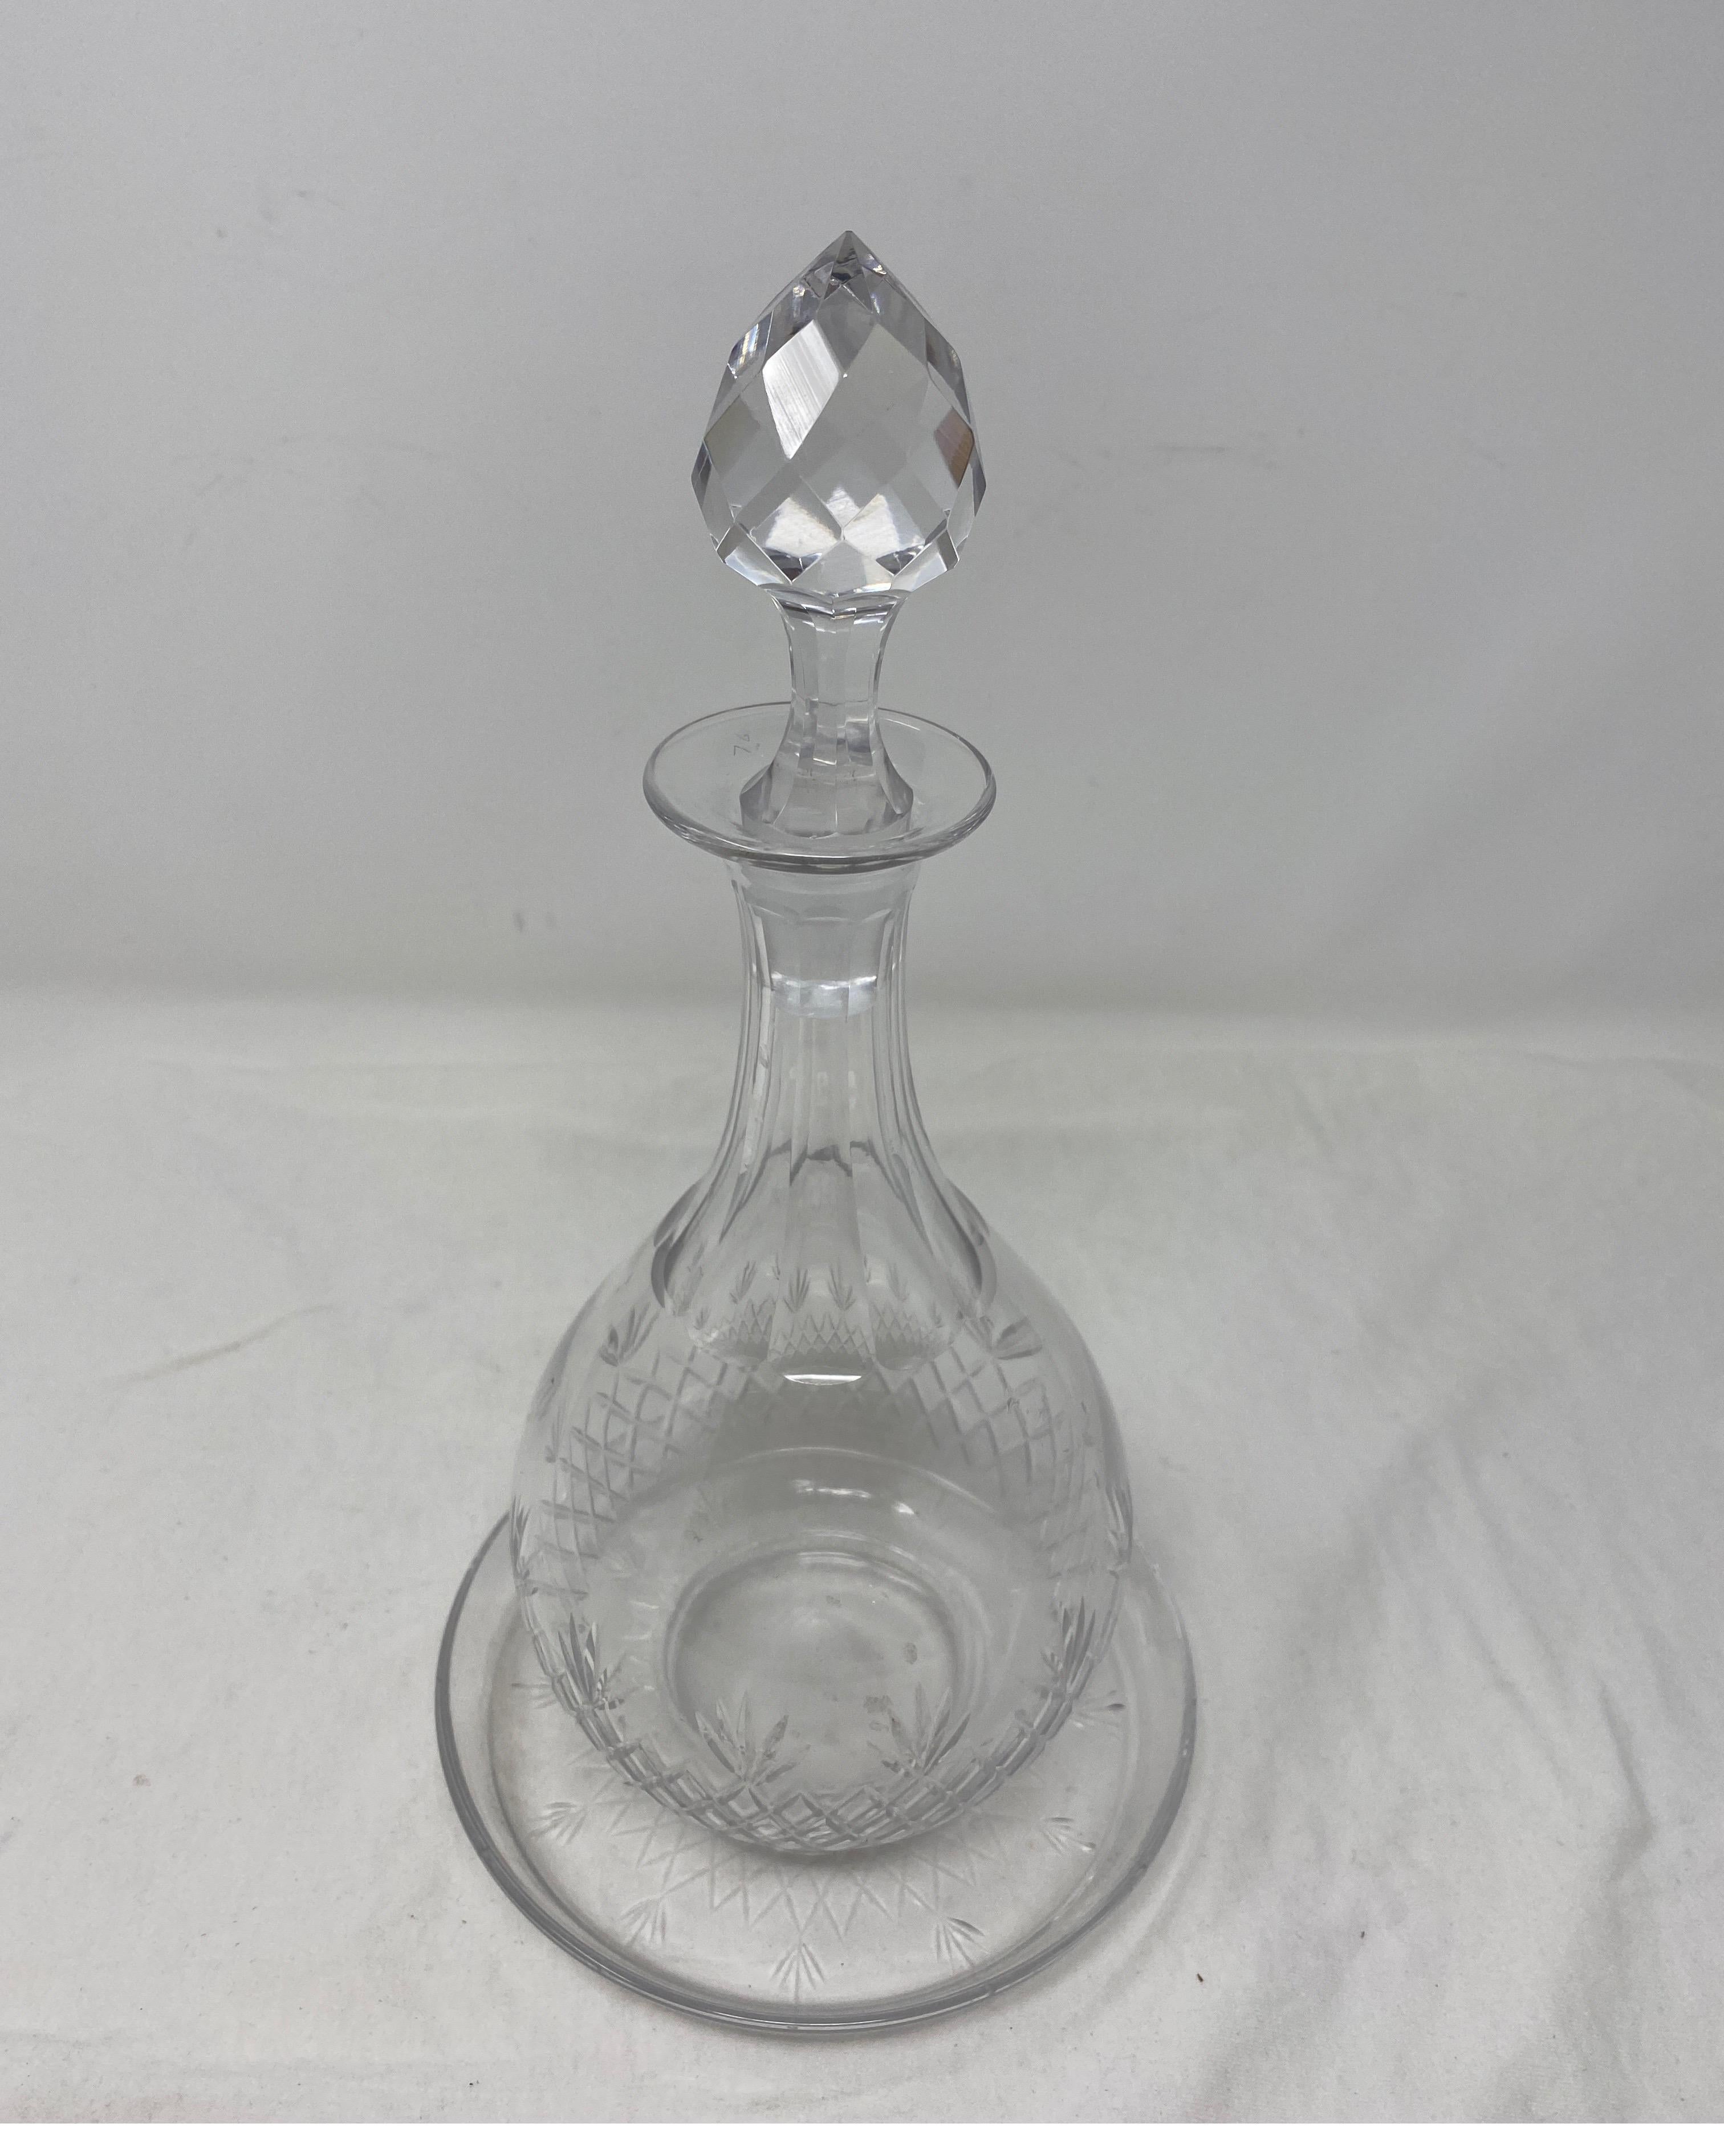 Baccarat carafe with coaster, 19th century. 3 pieces. The width of the carafe is approx. 4 1/2